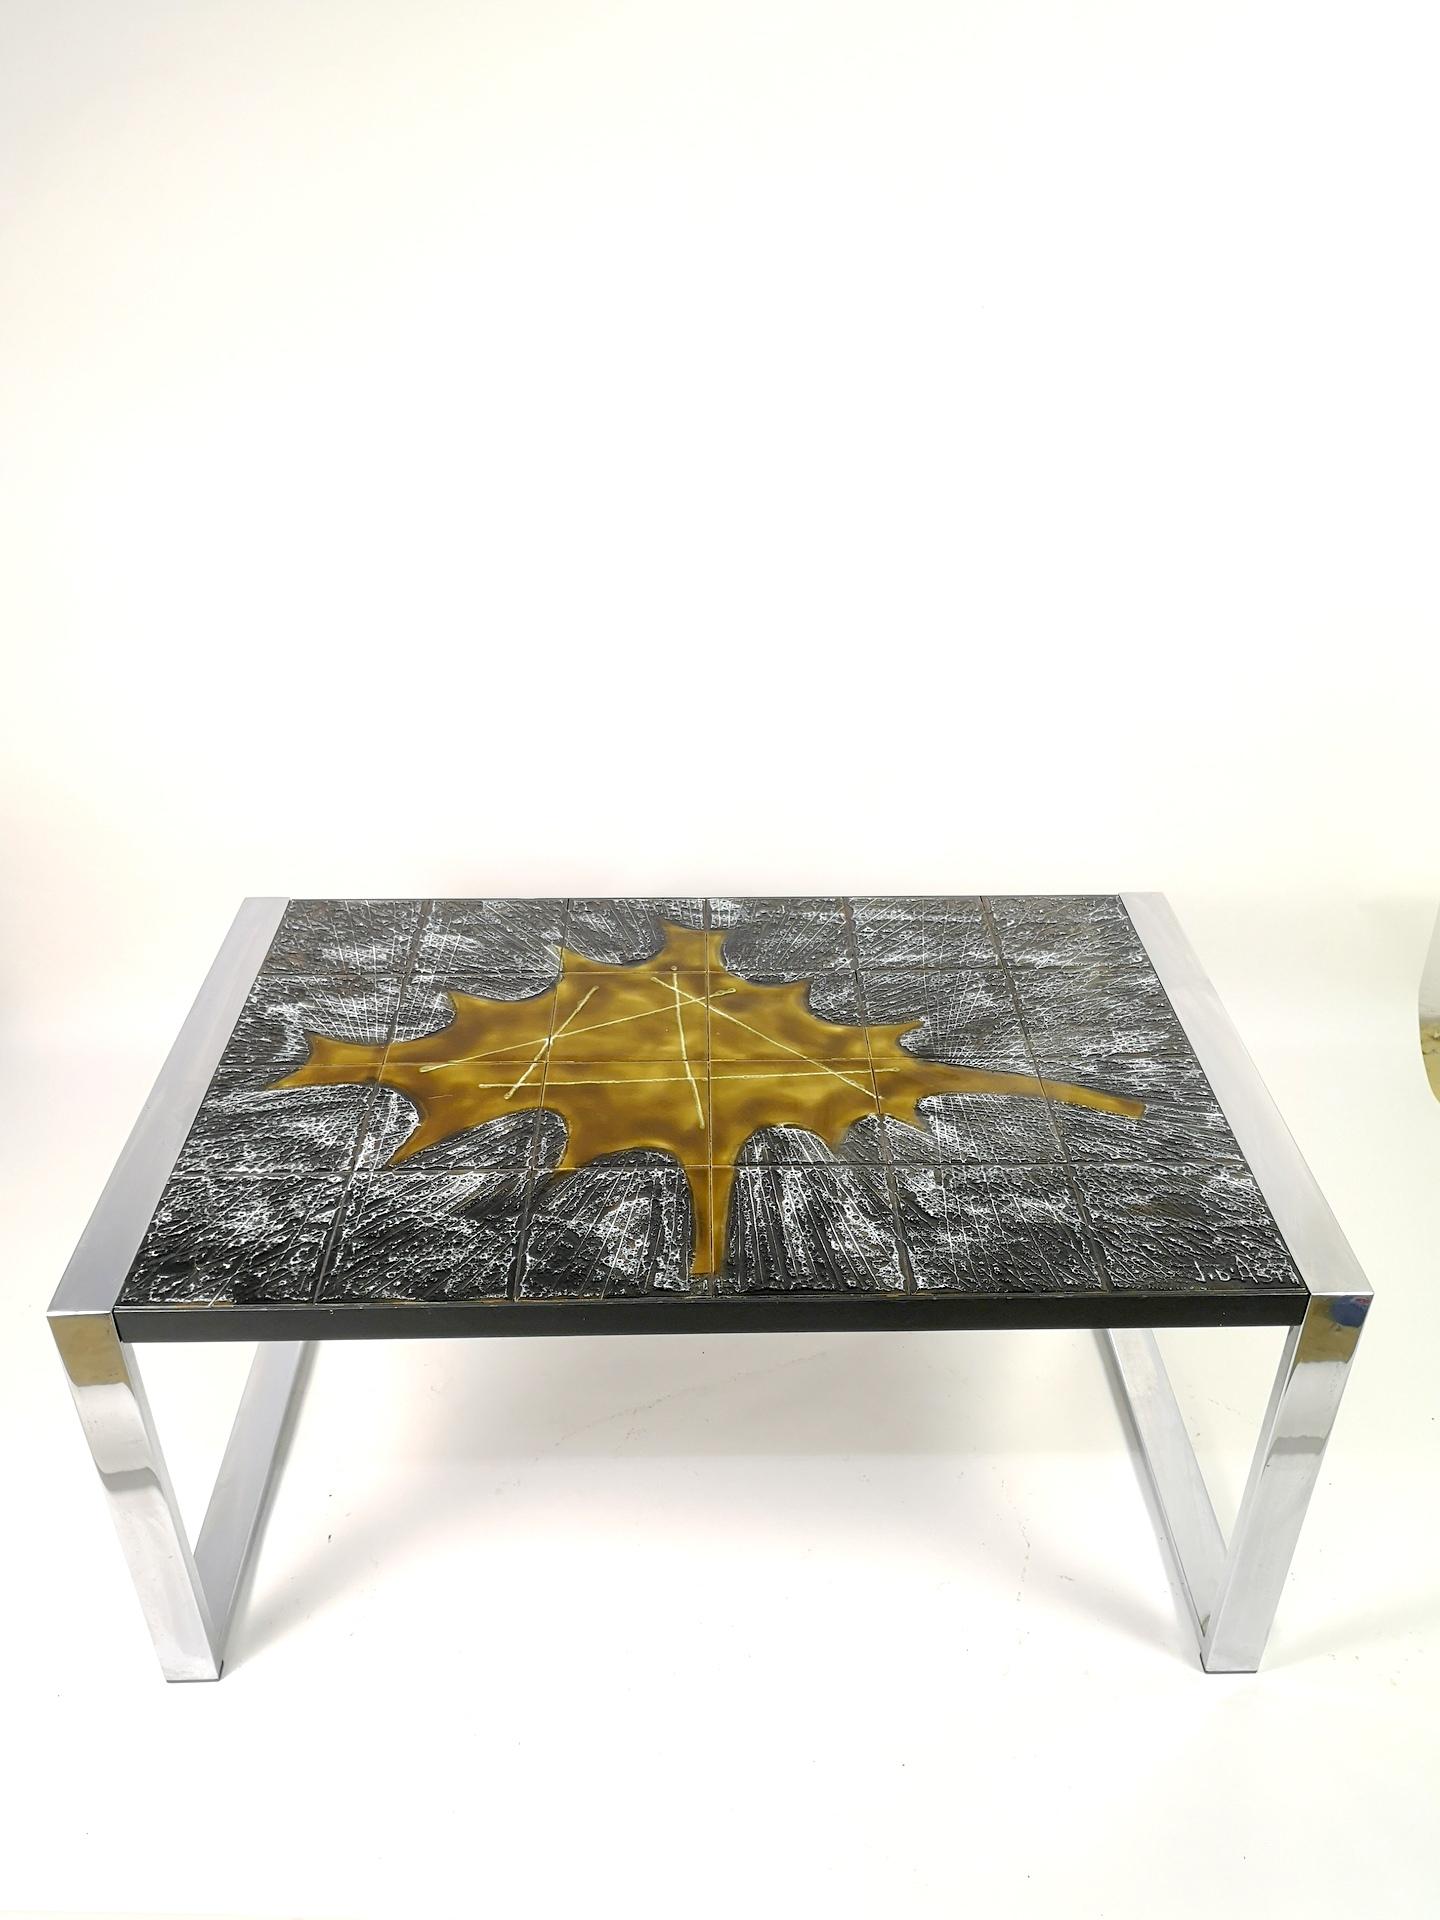 Mid-century modern or brutalist rectangular coffe table signed ceramic top and chrome plated steel base. Signed by ceramics artist Jean D'Asti and made in Vallauris, France, 1960s.